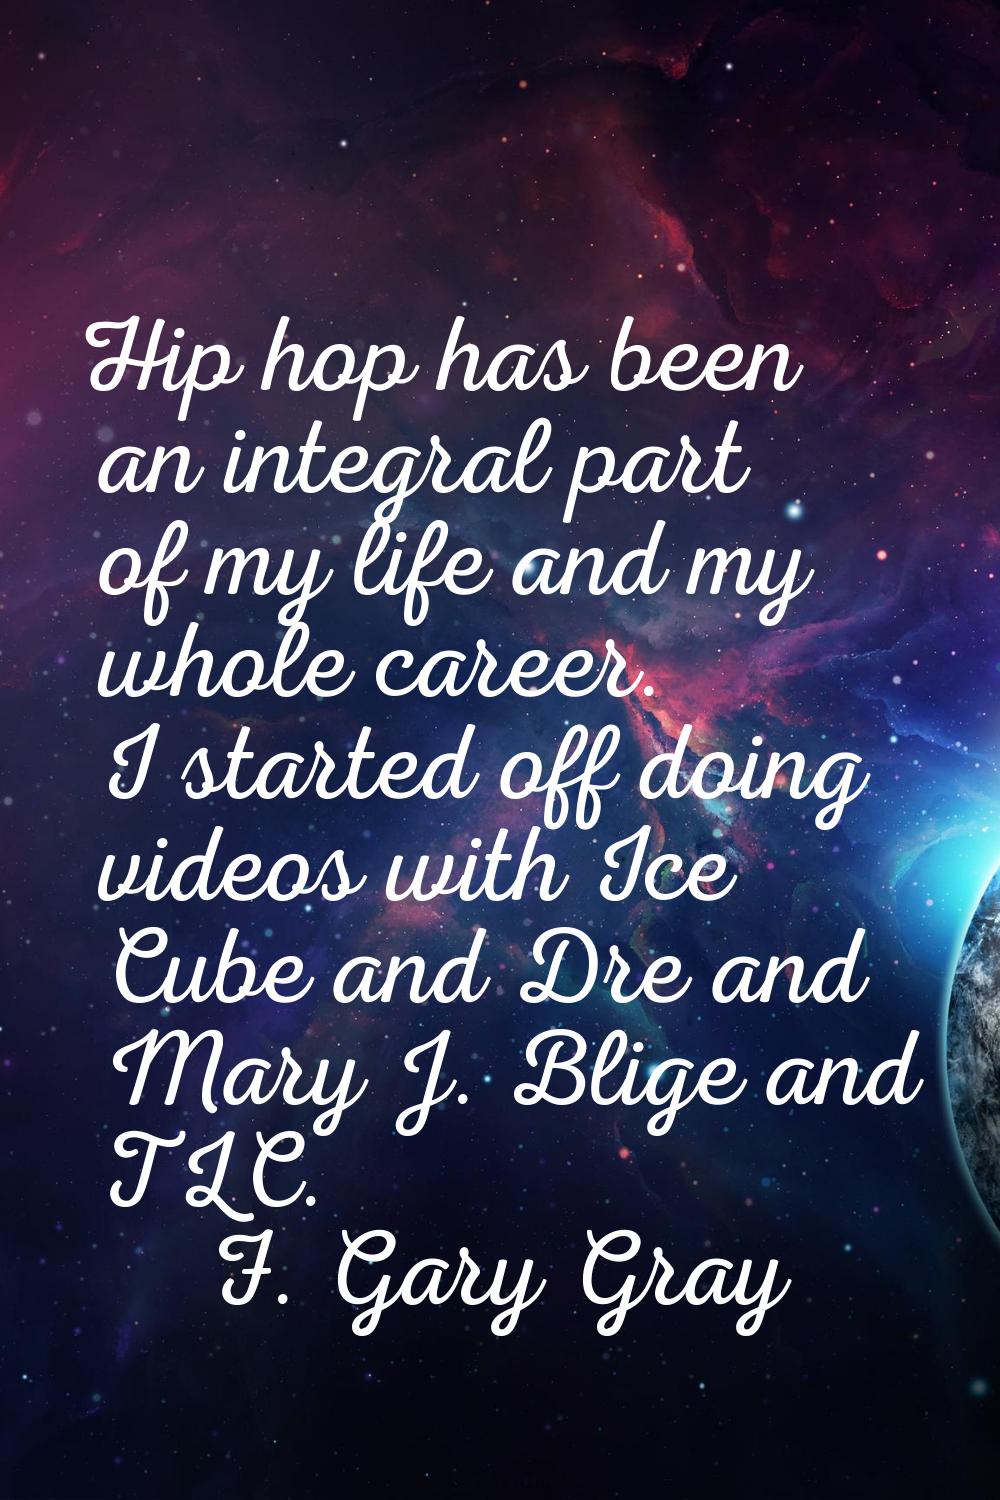 Hip hop has been an integral part of my life and my whole career. I started off doing videos with I